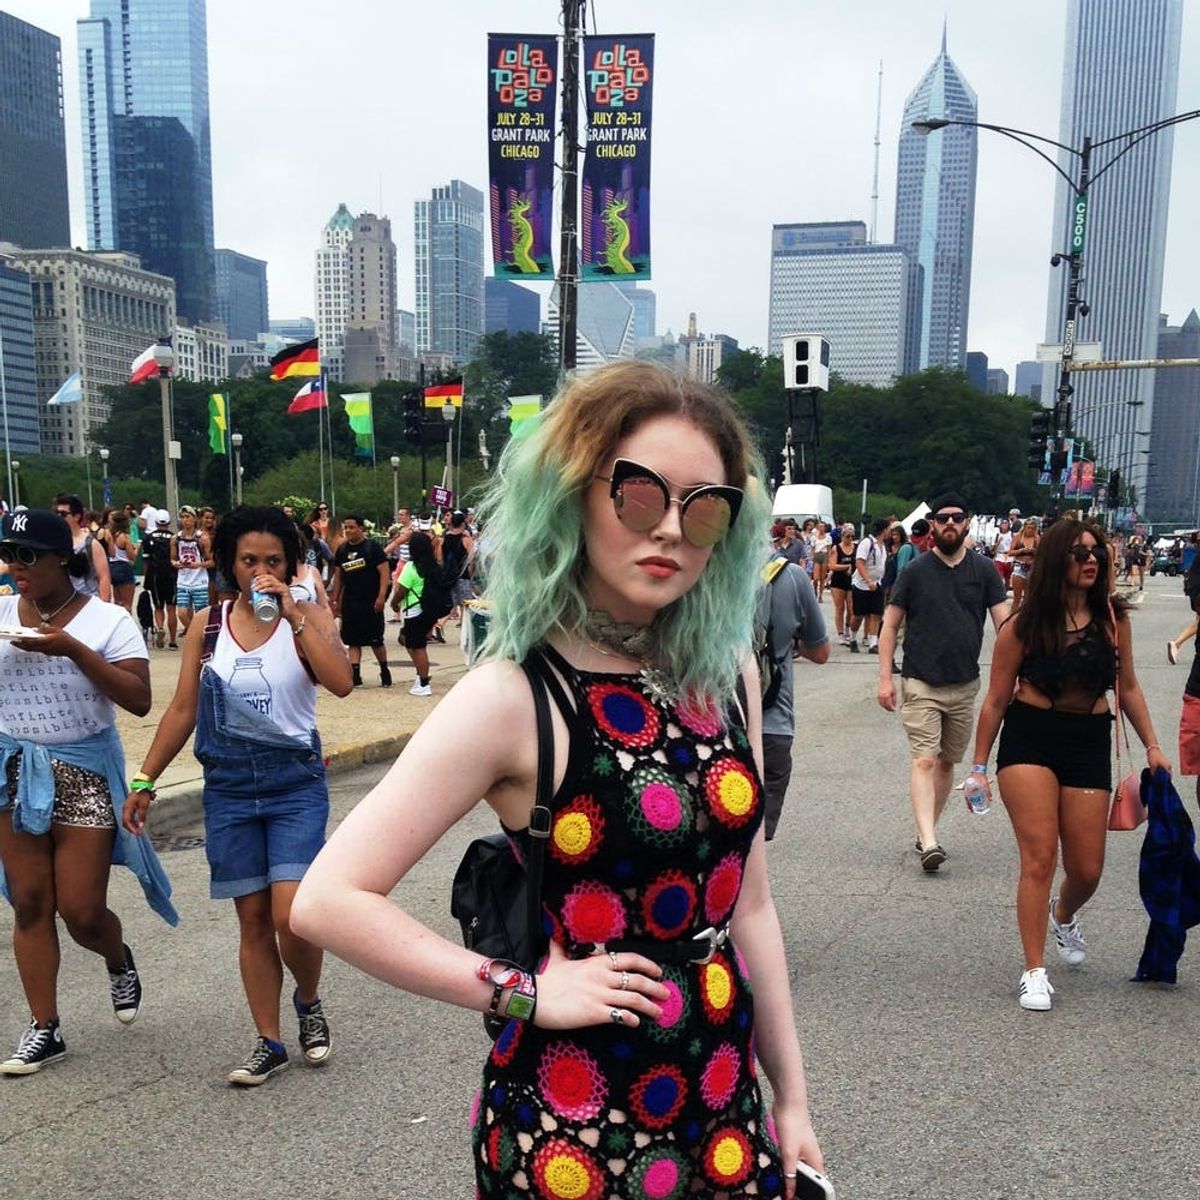 21 of the Best Street Style Snaps from Lollapalooza 2016